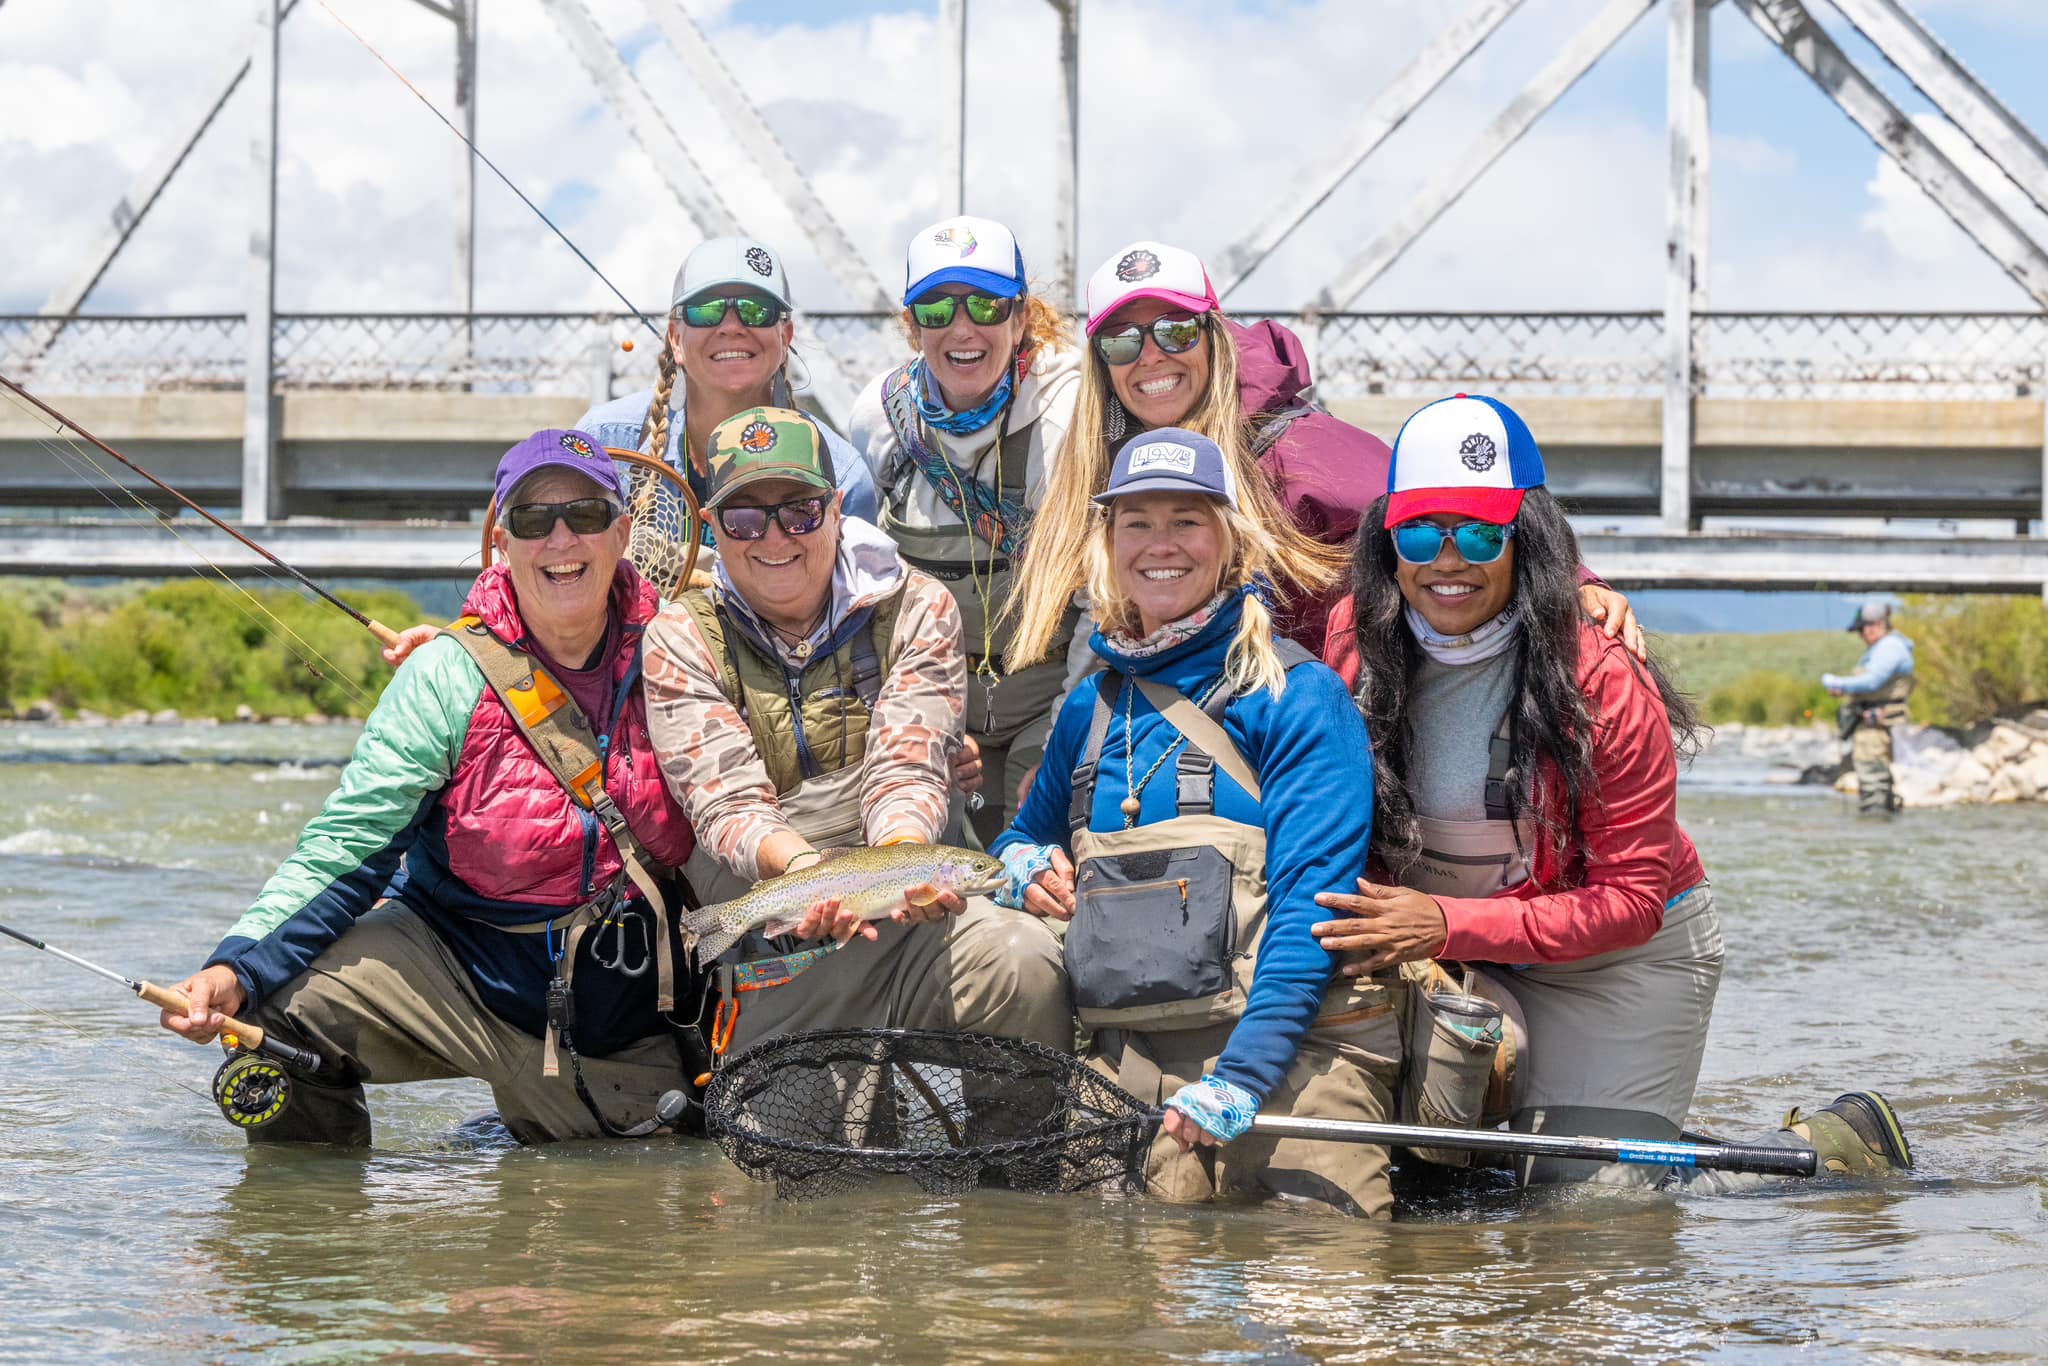 Group photo of women fly fishing with fish in Montana.